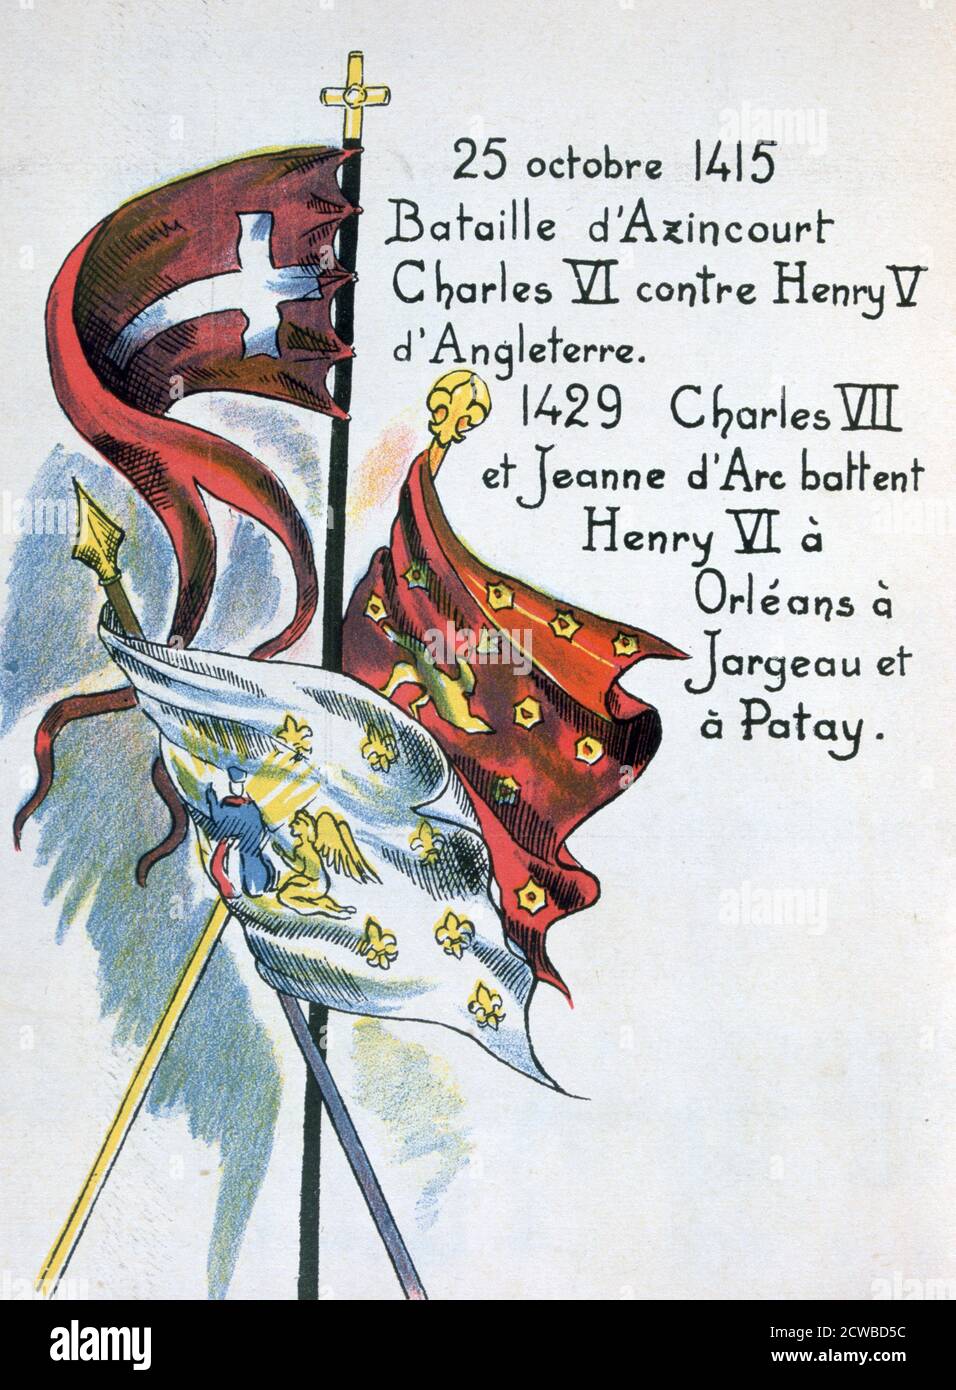 Battles of the The Hundred Years War, (20th century). The Battles of Agincourt (1415) and Orleans, Jargeau and Patay (1429). From an anti-British brochure titled Who has been the enemy of France through History? The artist is unknown. Stock Photo